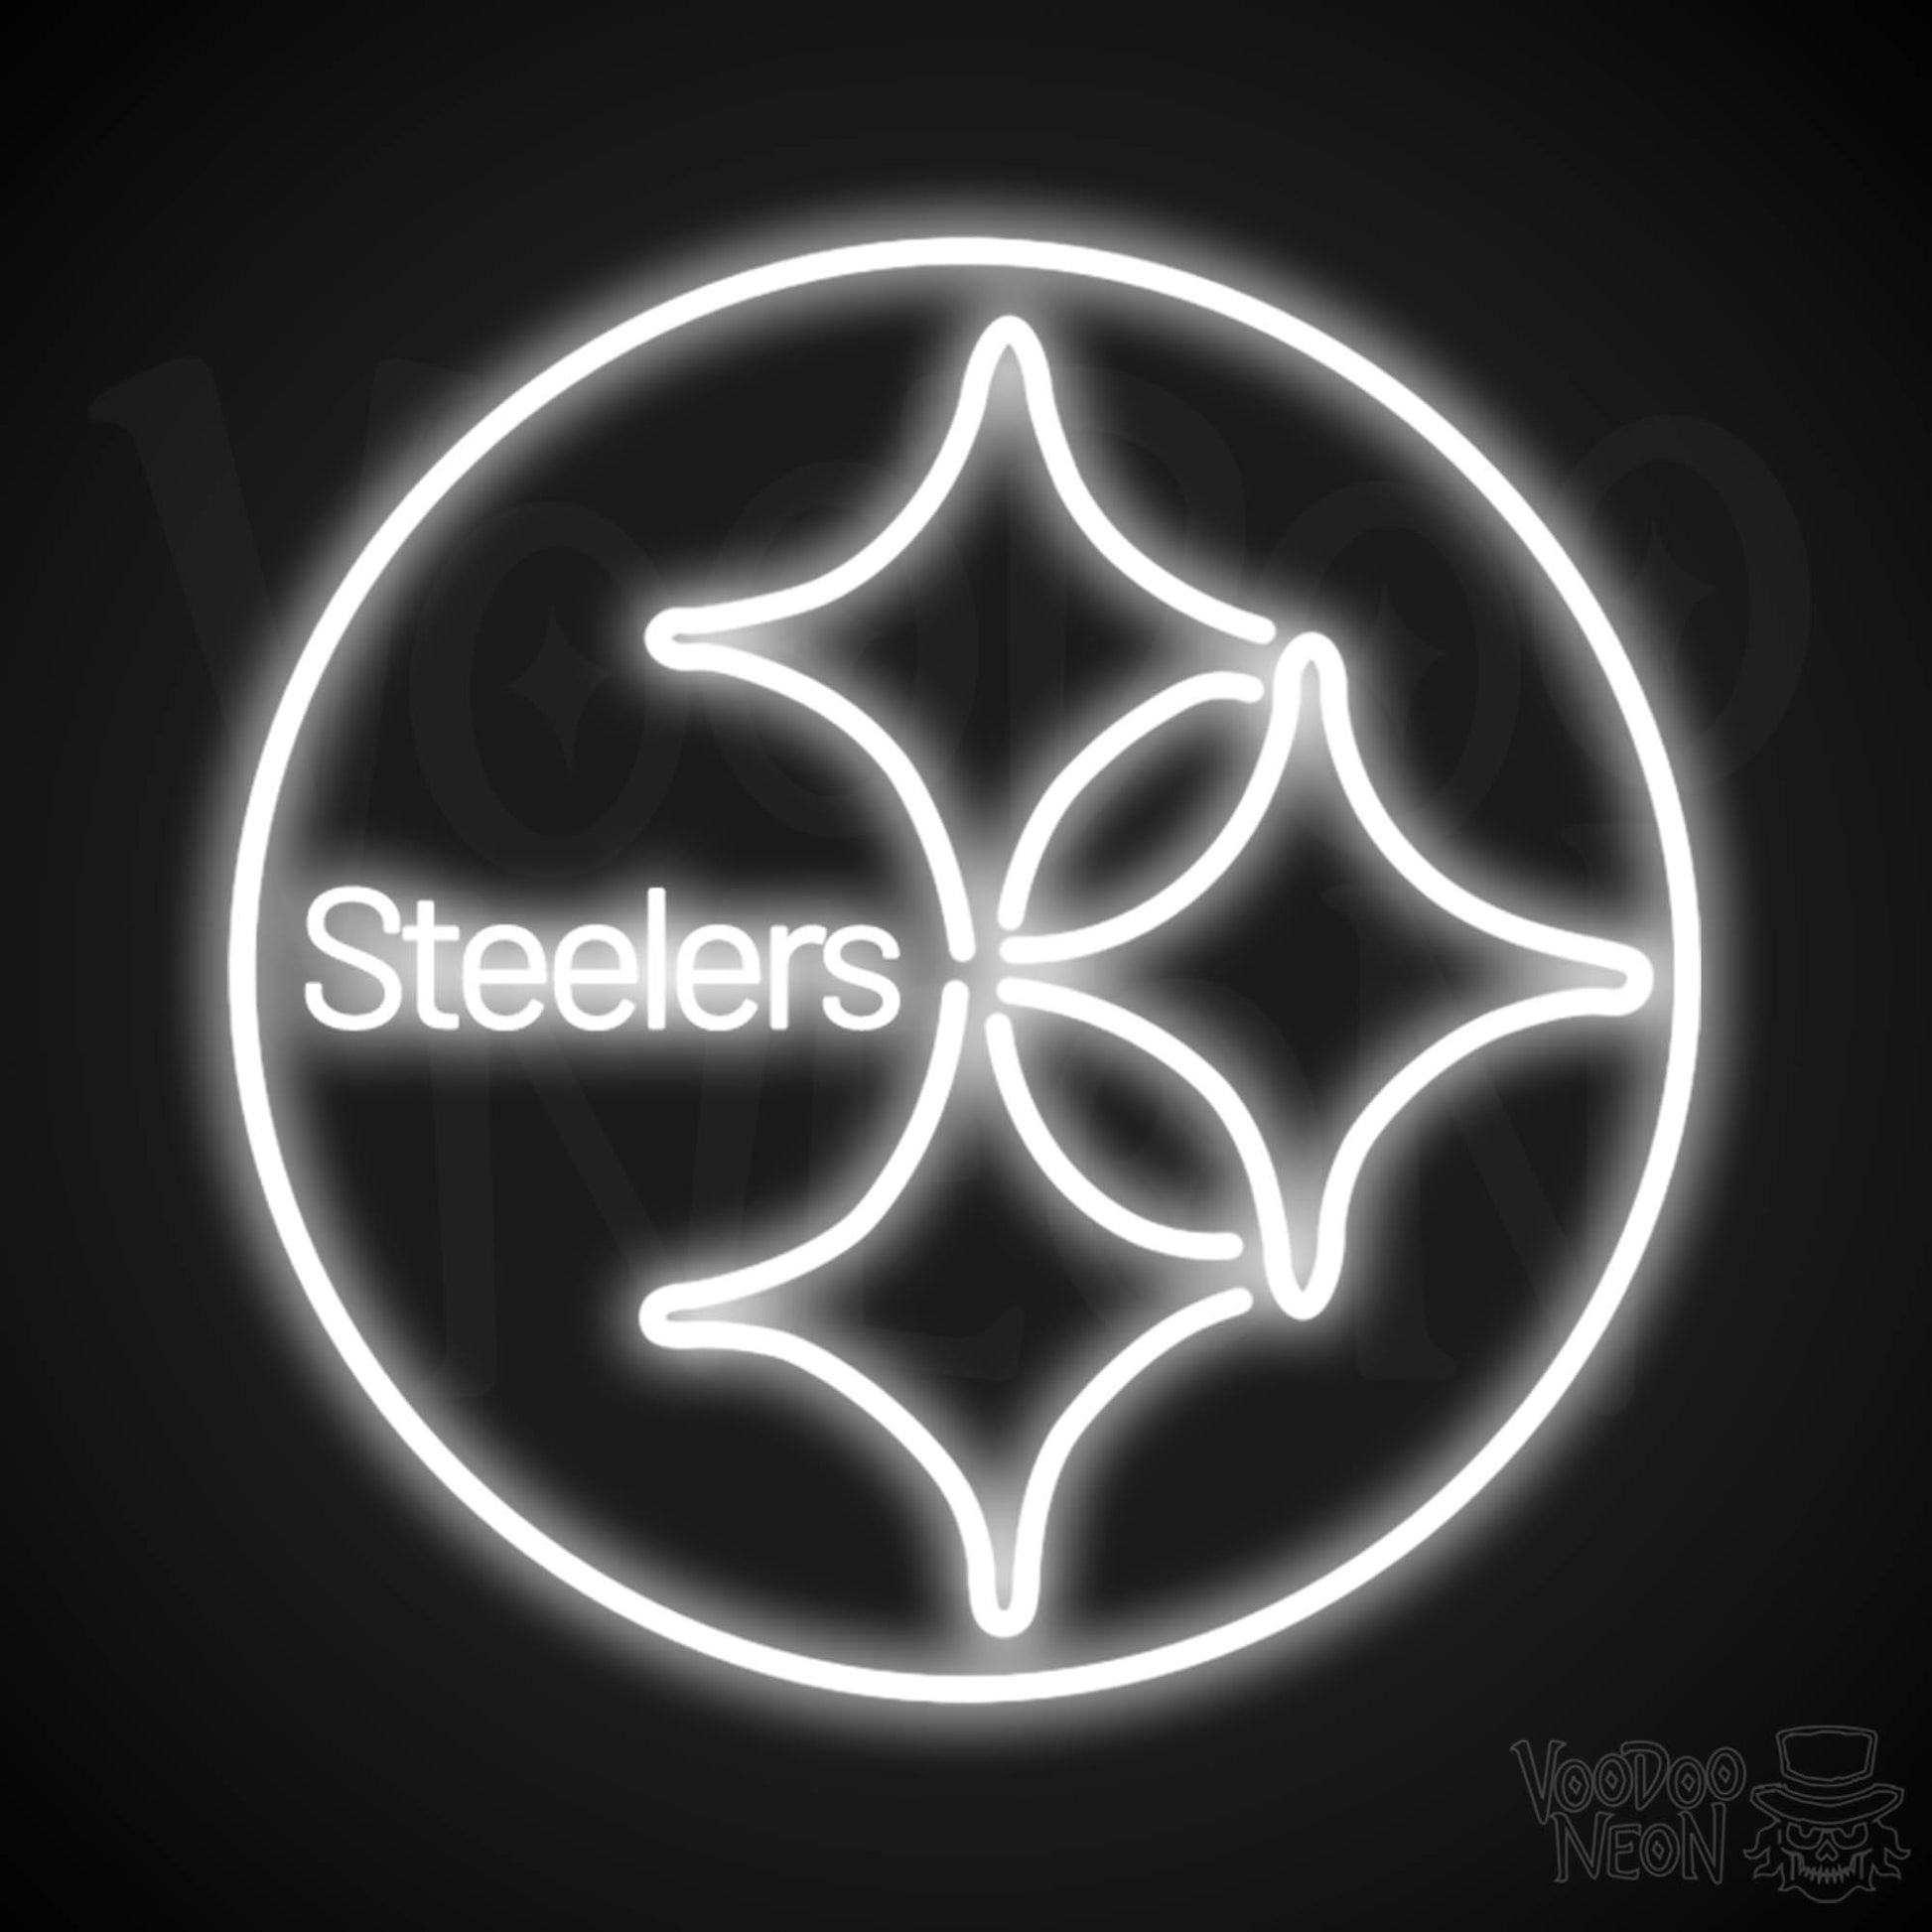 Pittsburgh steelers neon sign pittsburgh steelers sign neon steelers logo wall art voodoo neon